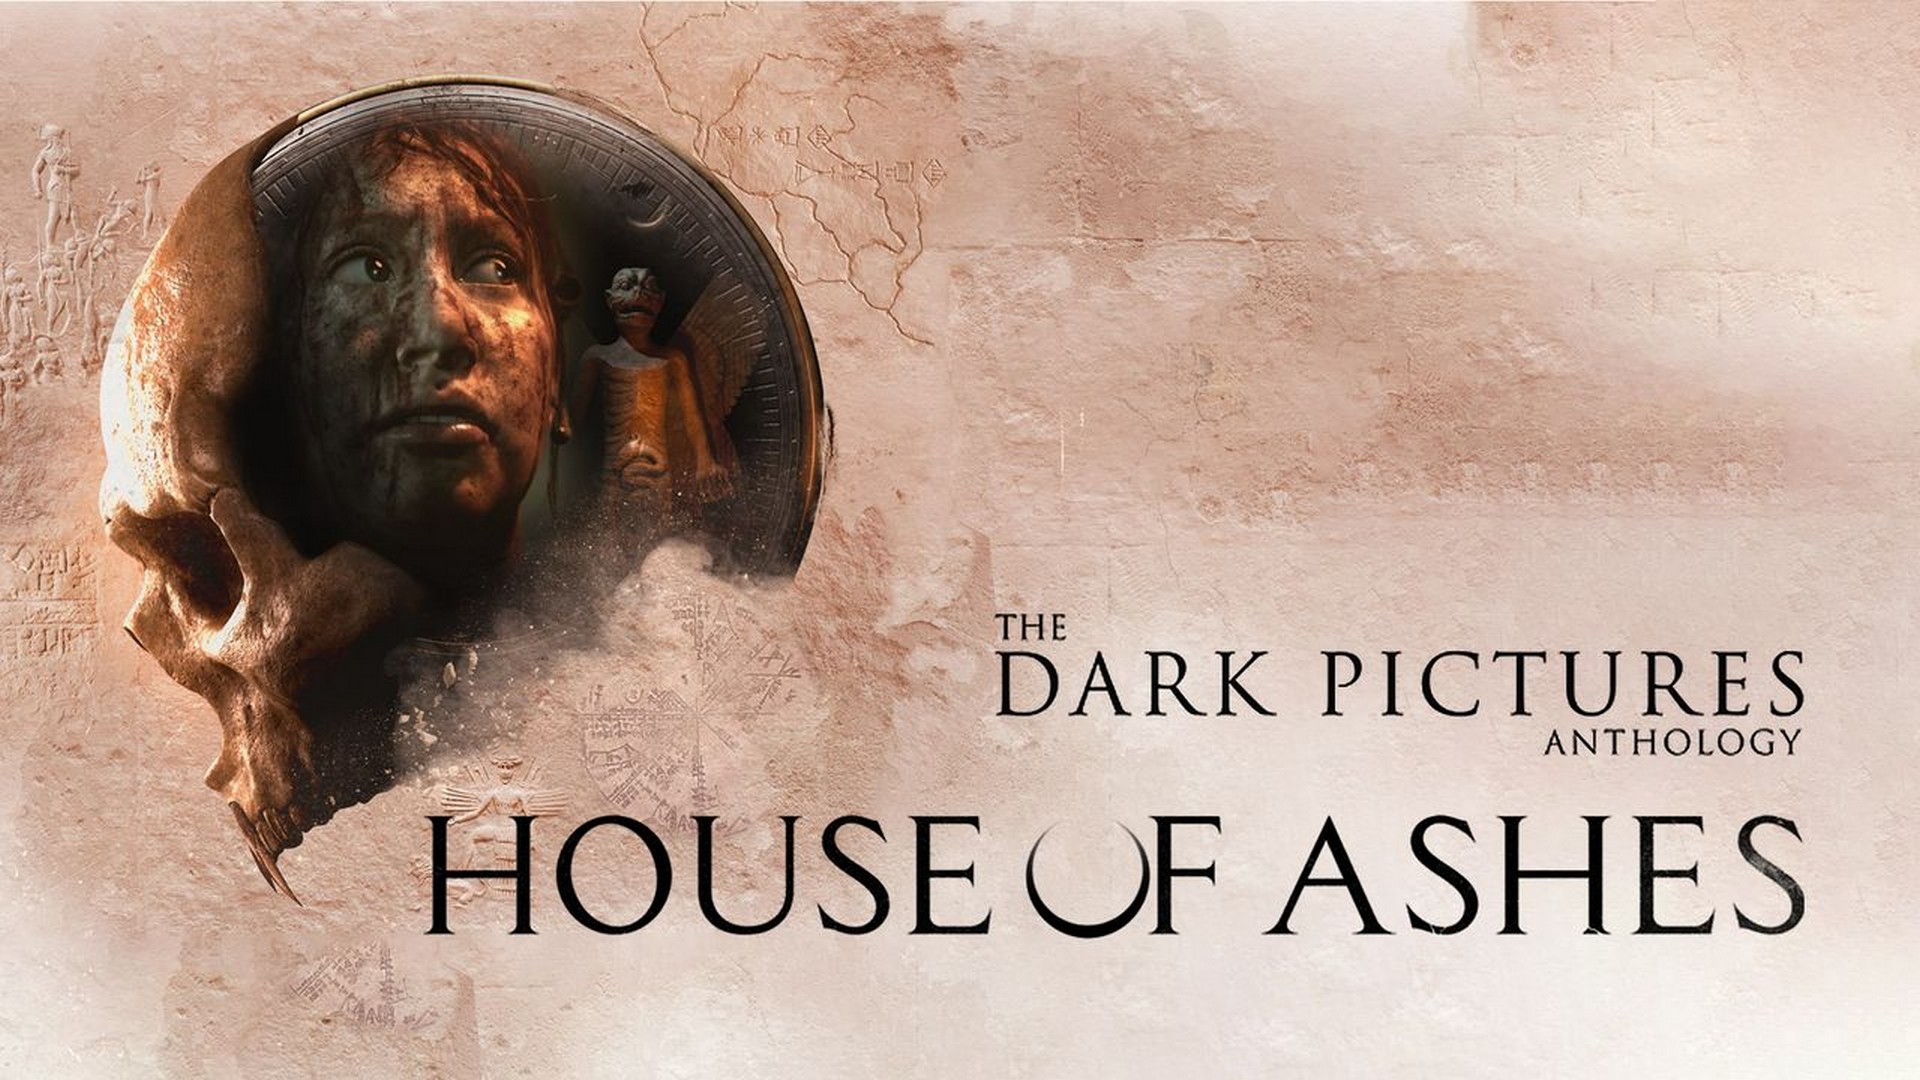 Get Ready For A Terrifying Experience In The Dark Pictures Anthology: House Of Ashes – Out Now